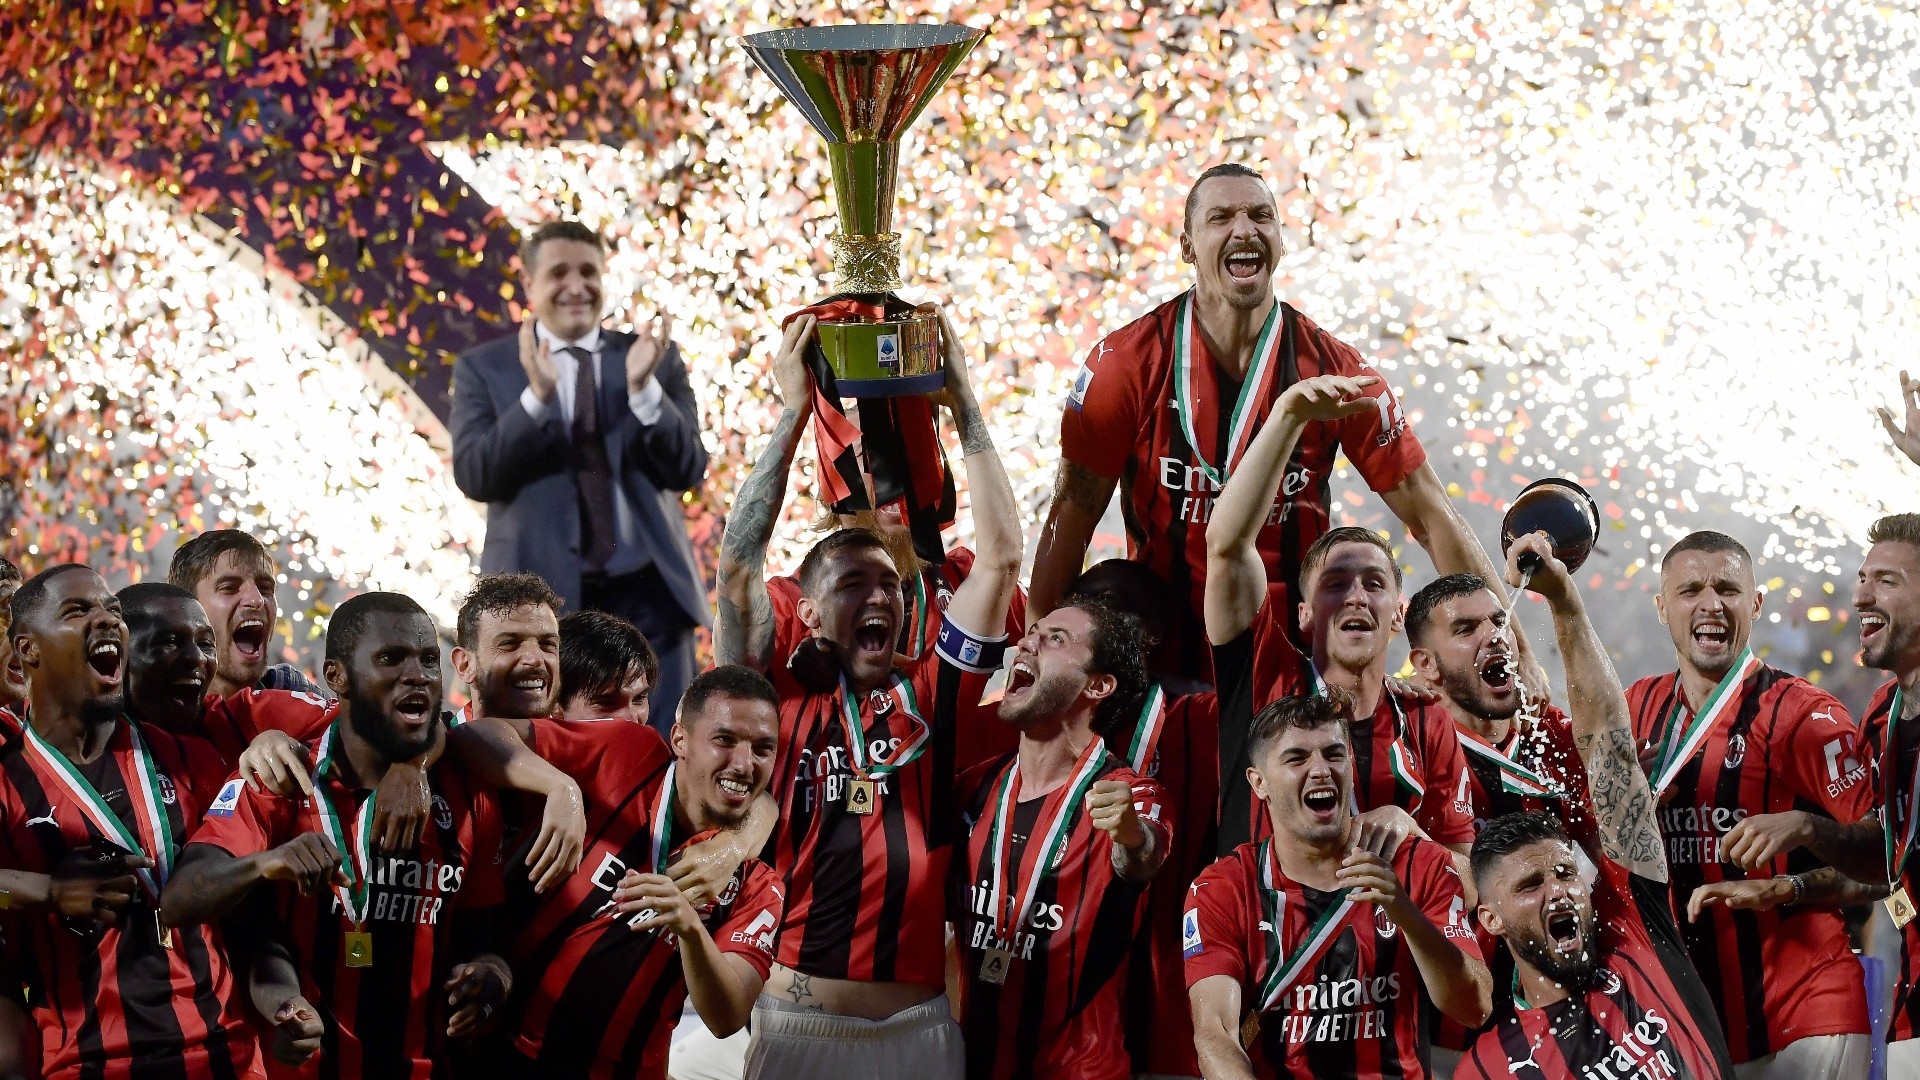 How Pioli, Maldini & Ibrahimovic brought Milan back from the brink of bankruptcy to Serie A champions